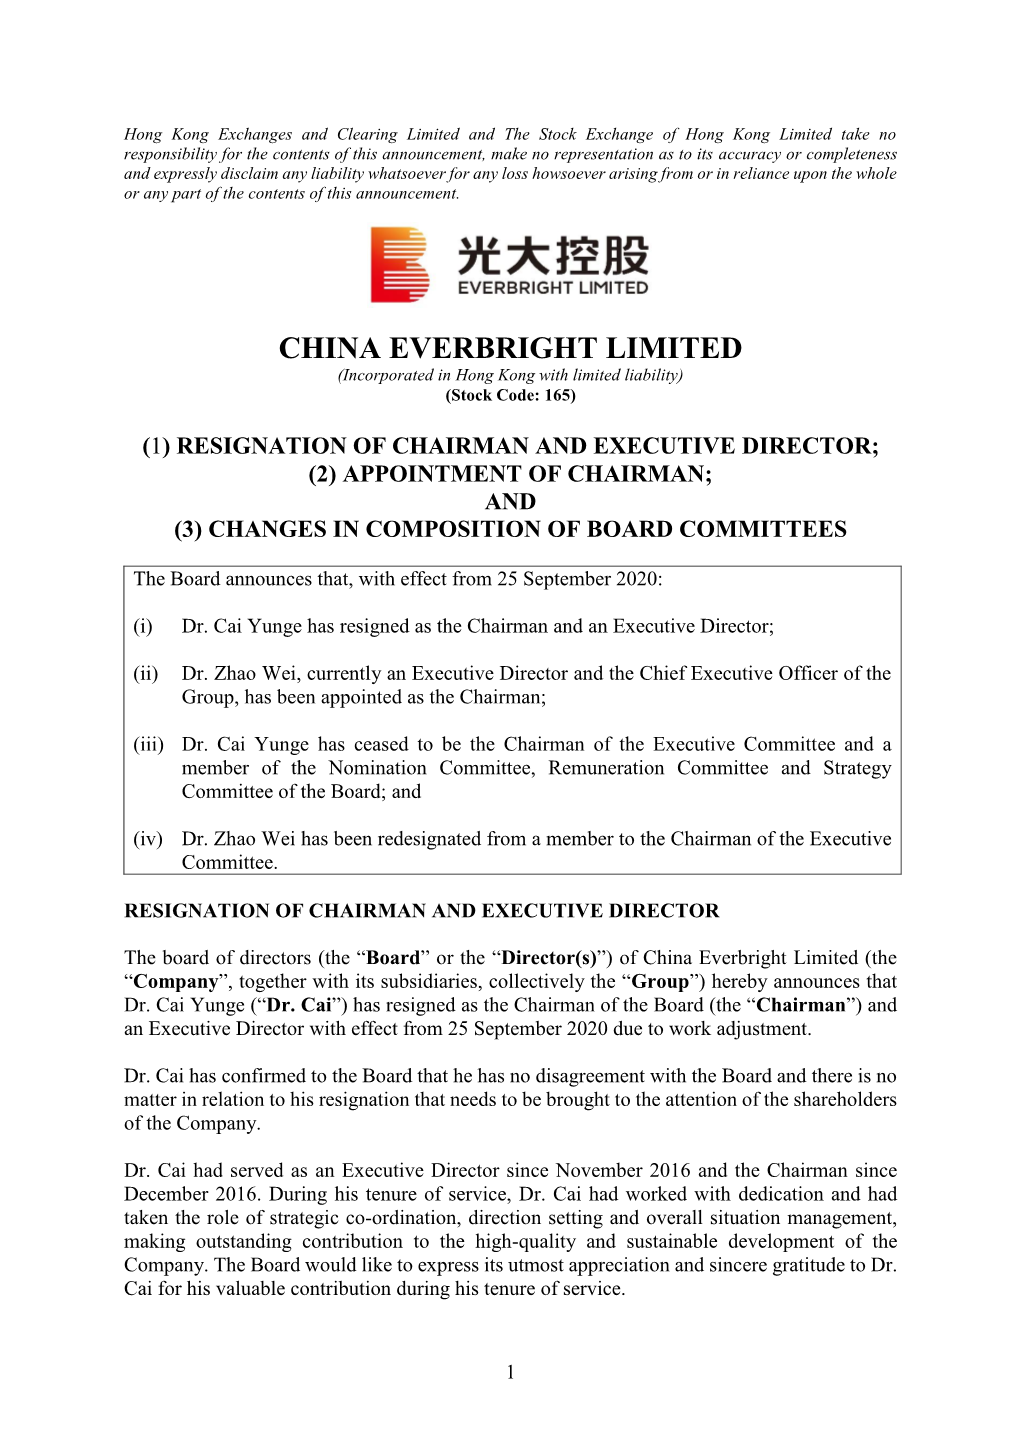 CHINA EVERBRIGHT LIMITED (Incorporated in Hong Kong with Limited Liability) (Stock Code: 165)